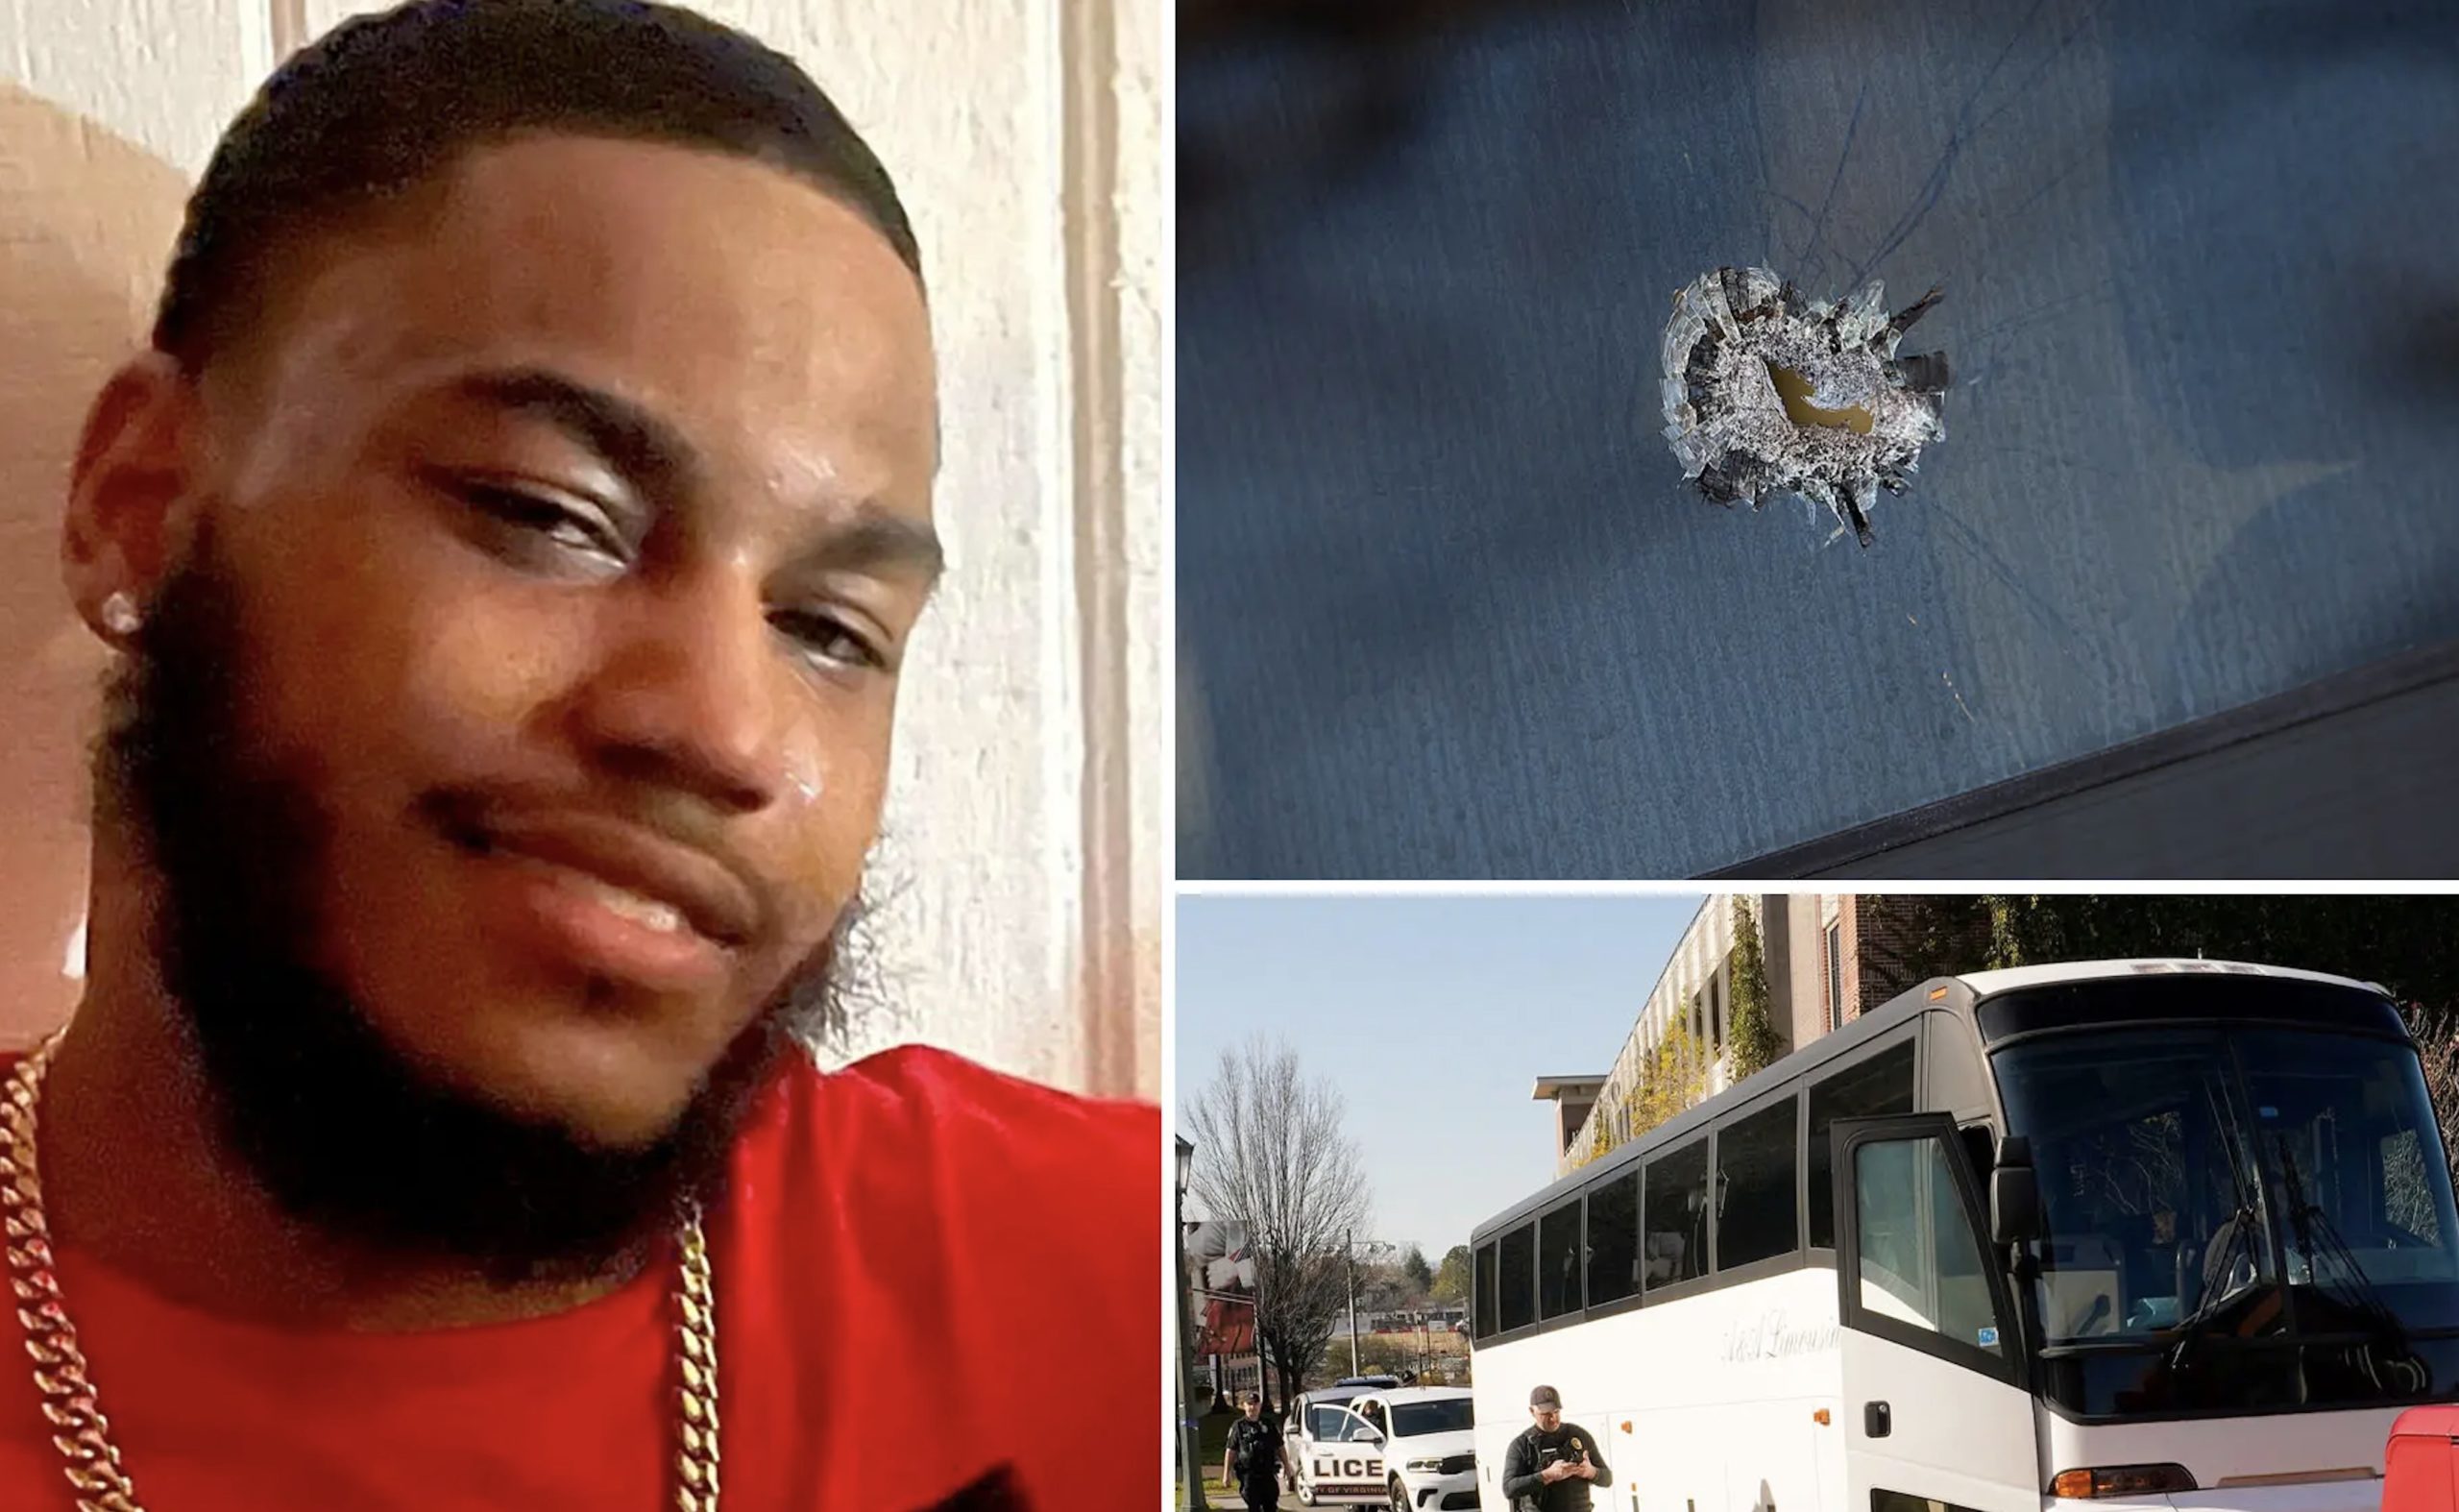 Virginia Shooter Christopher Darnell Jones Jr. Targeted Football Players and Shot One While He Was Sleeping